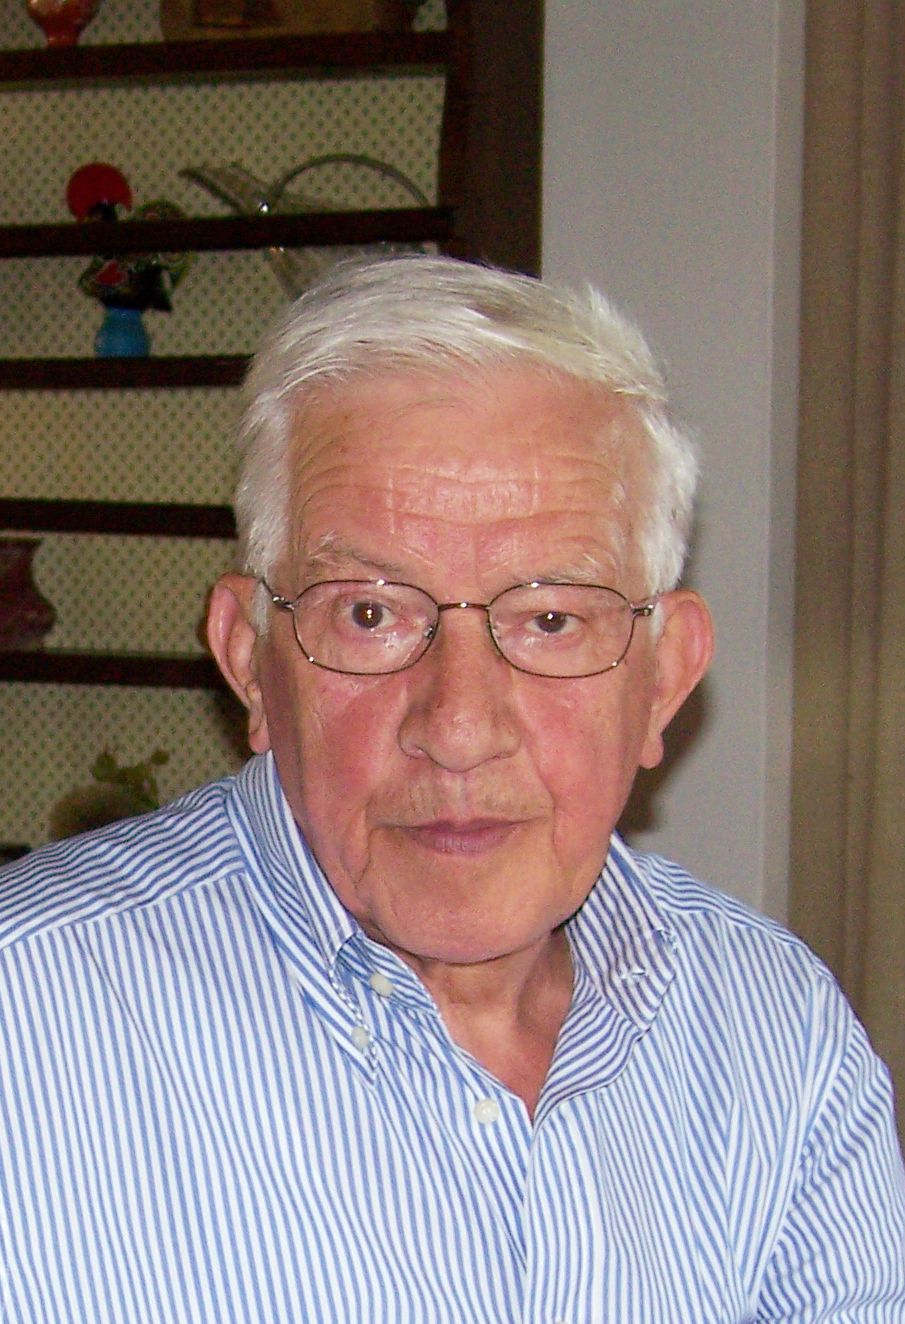 VUERICH CELSO